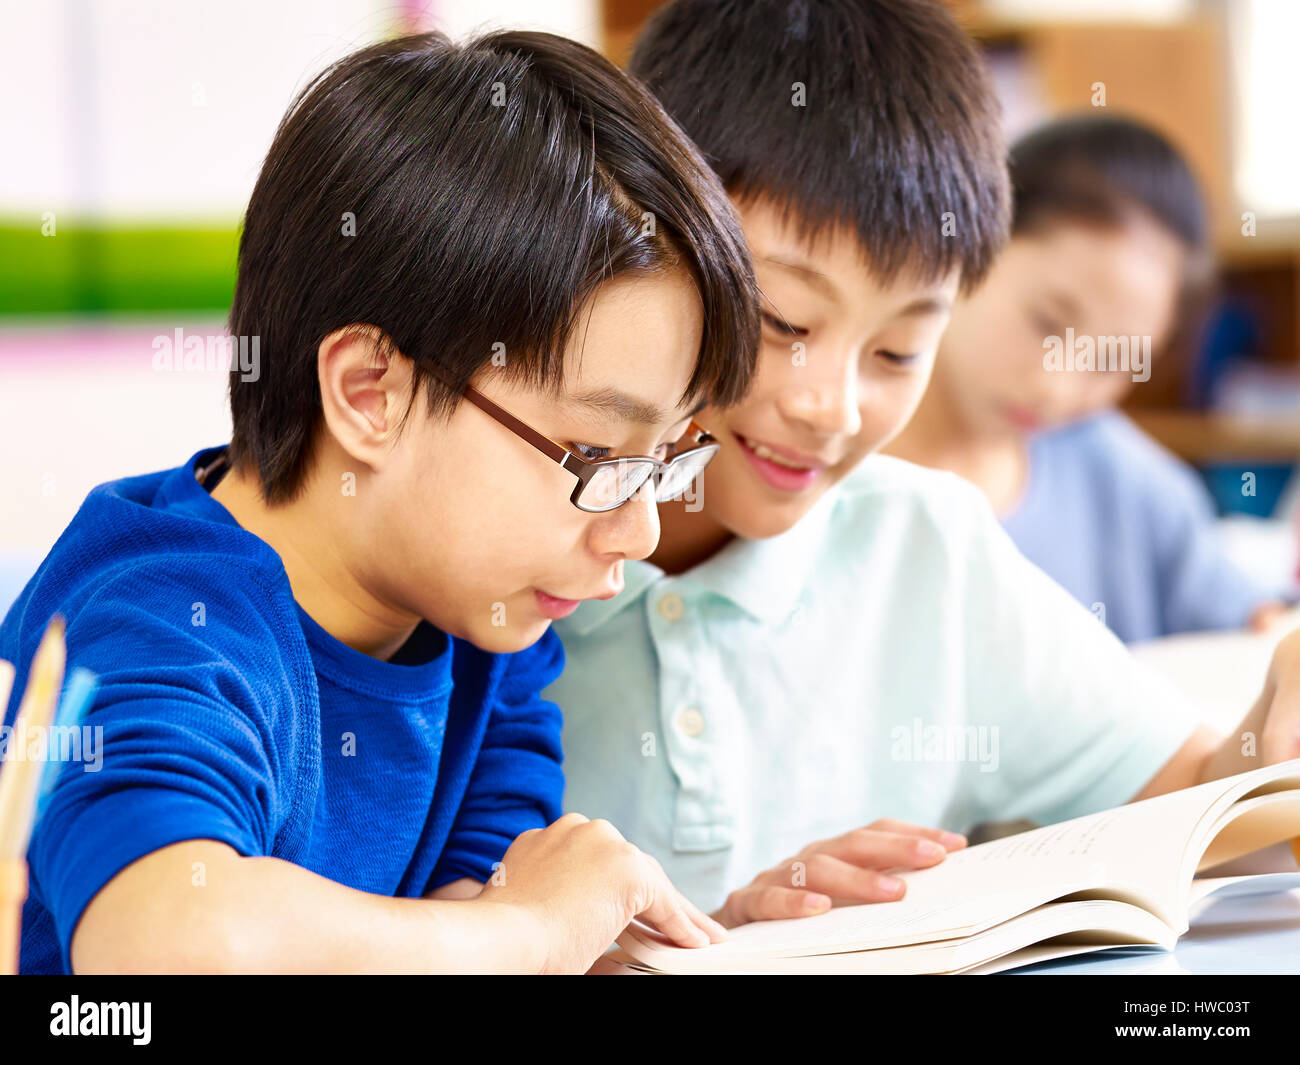 close-up of two asian elementary school pupil studying together in classroom. Stock Photo